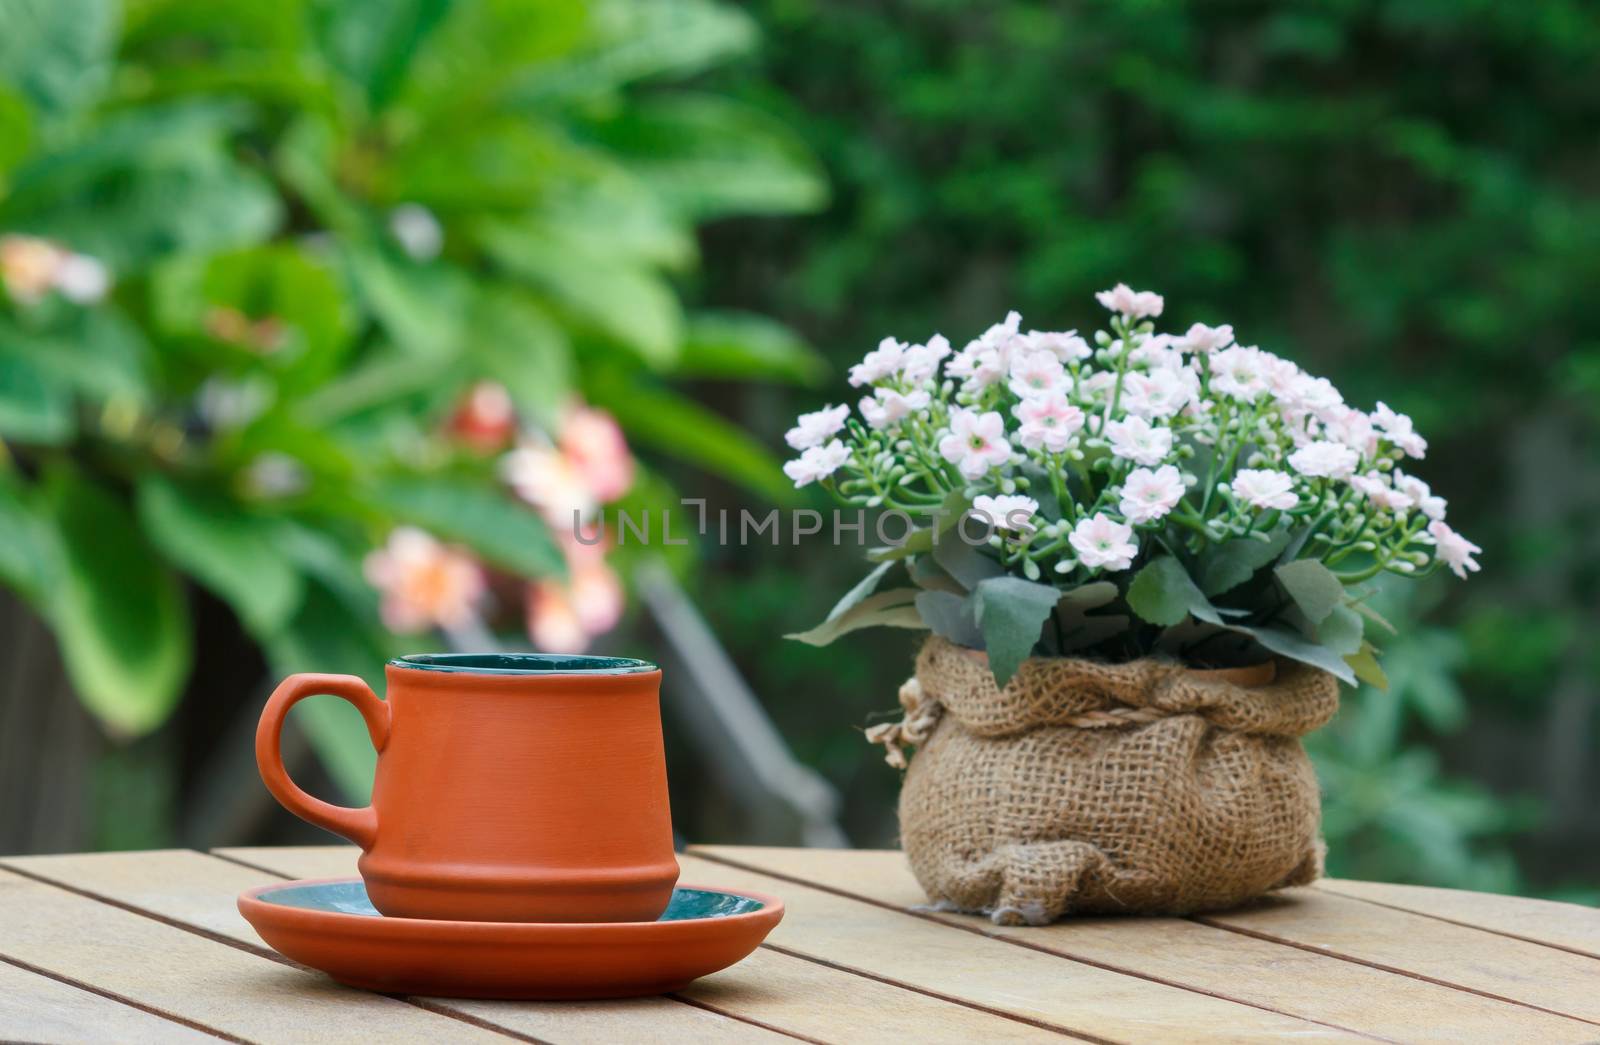 Cup of coffee and flowers on the wooden table with tree in background.Focus on the cup.